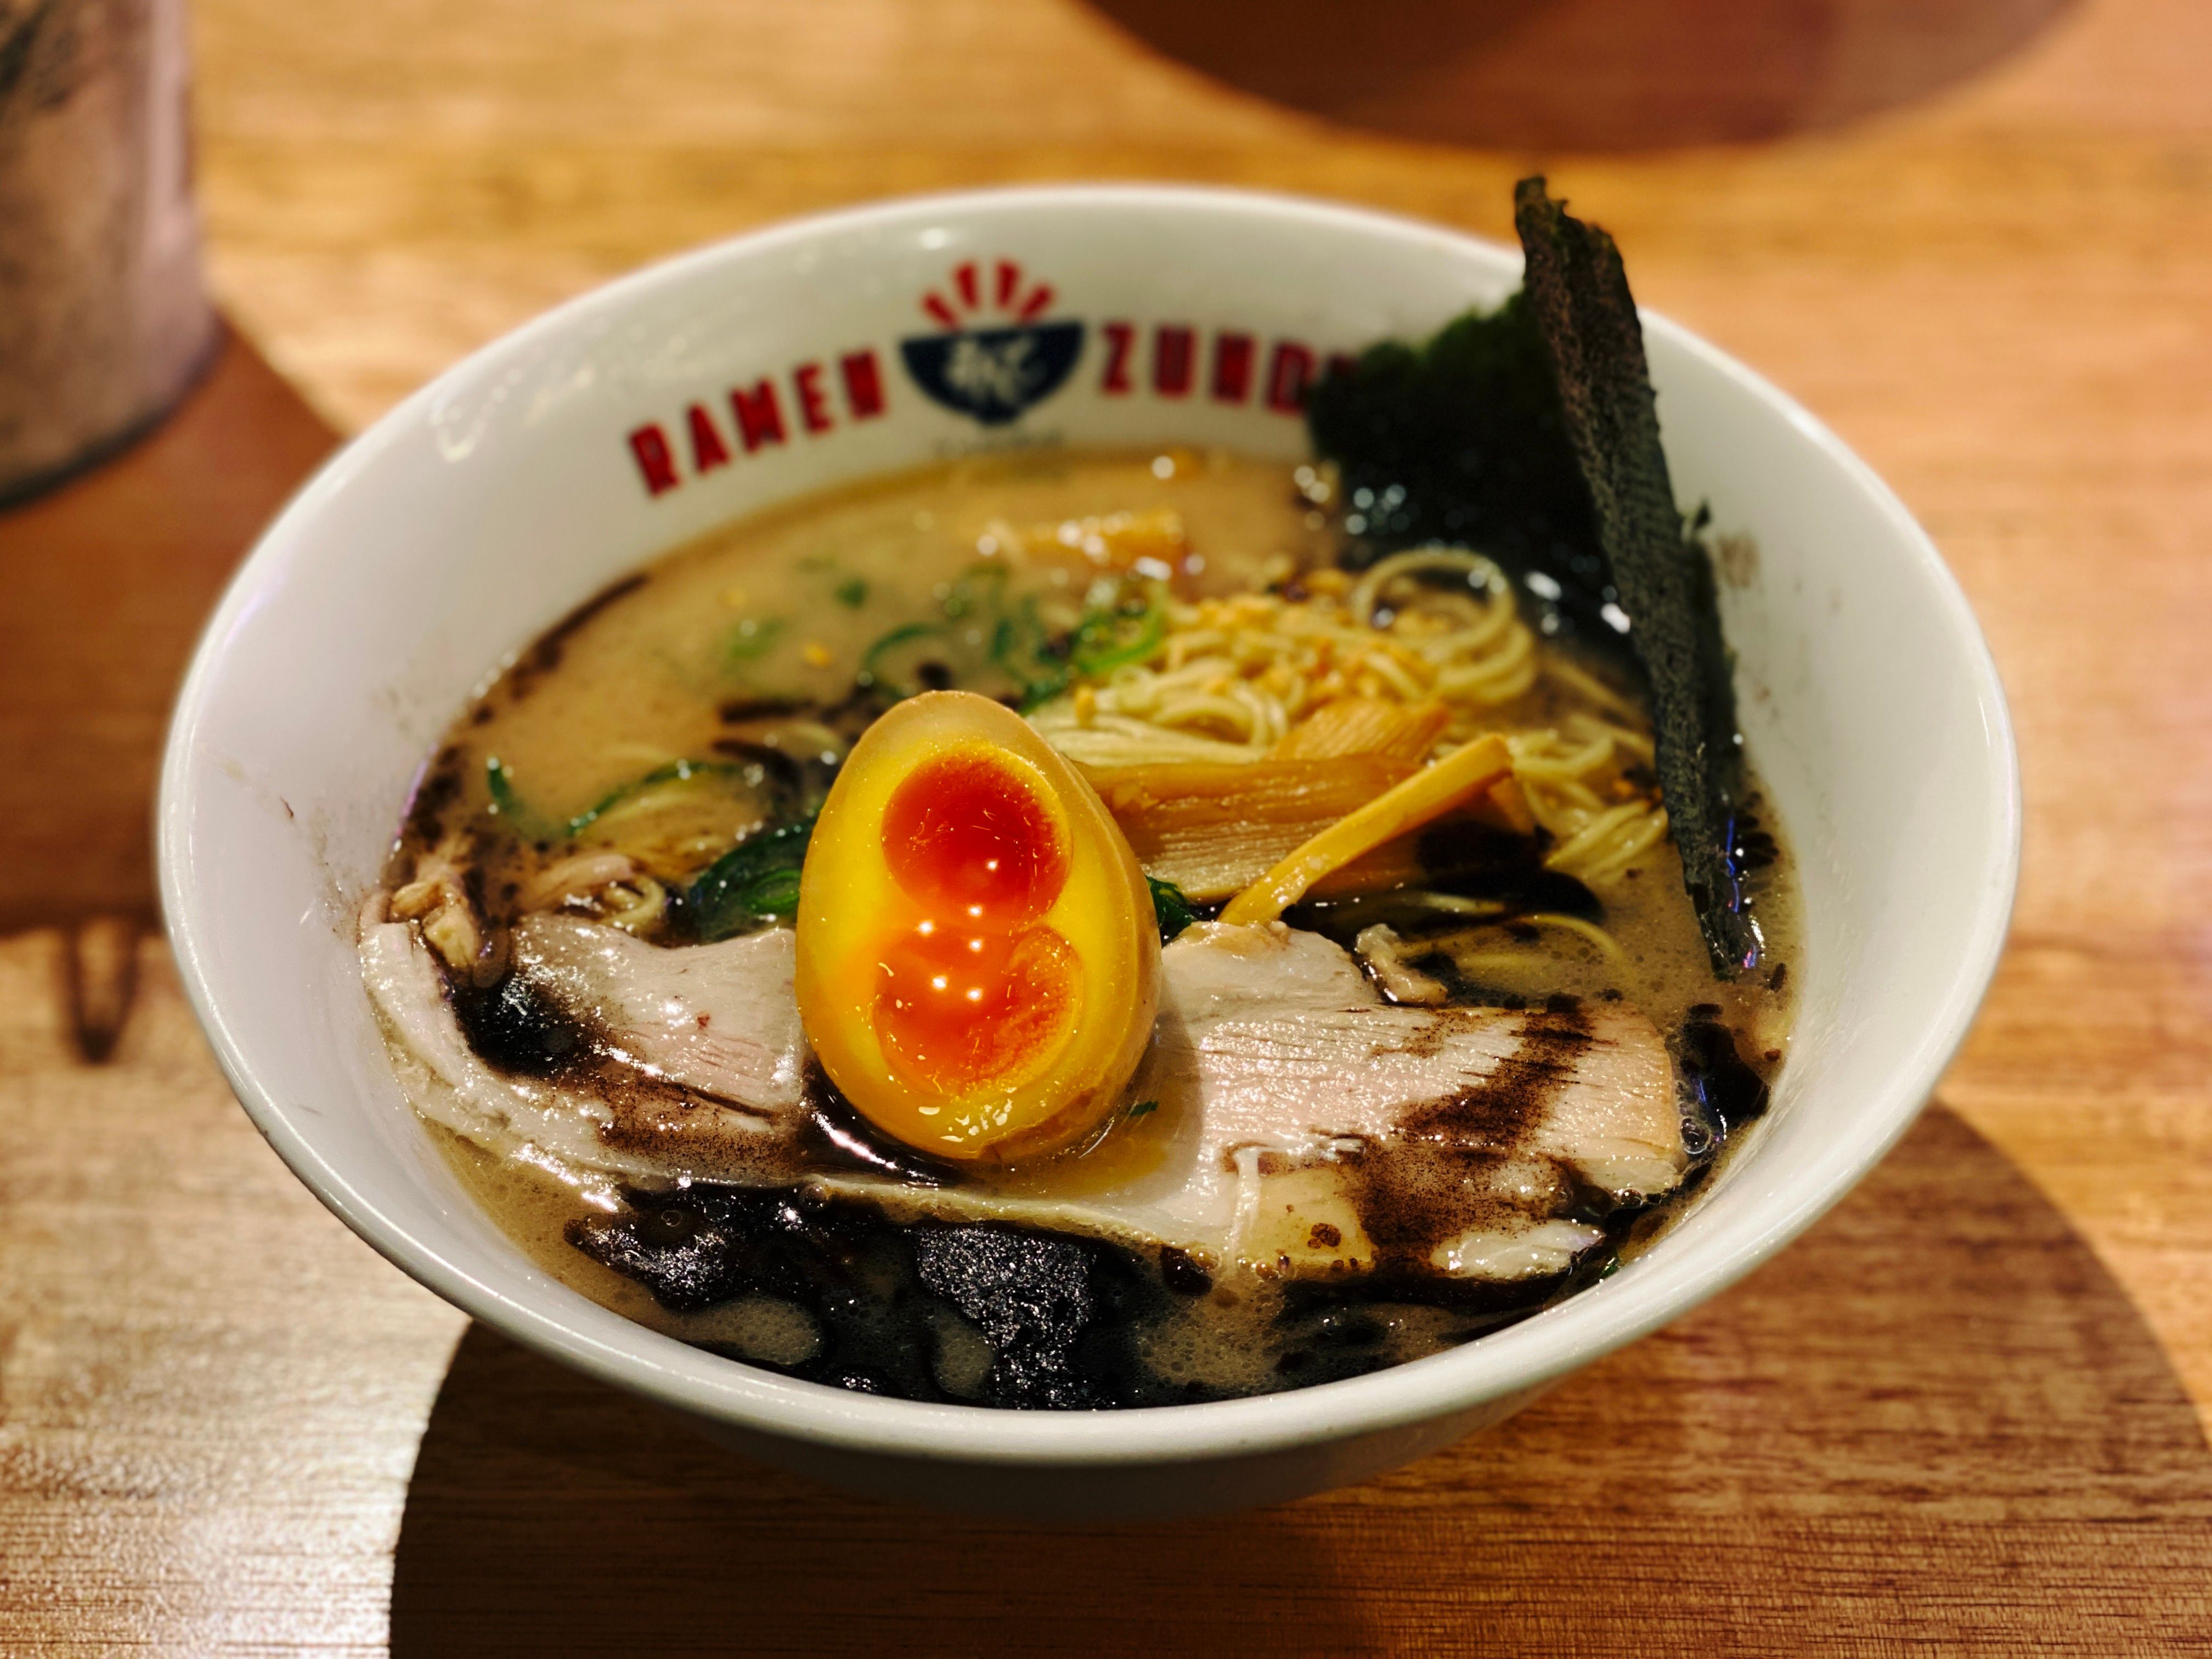 A photo of a bowl of ramen with a slice of pork in it, and half a boiled egg sitting on top.